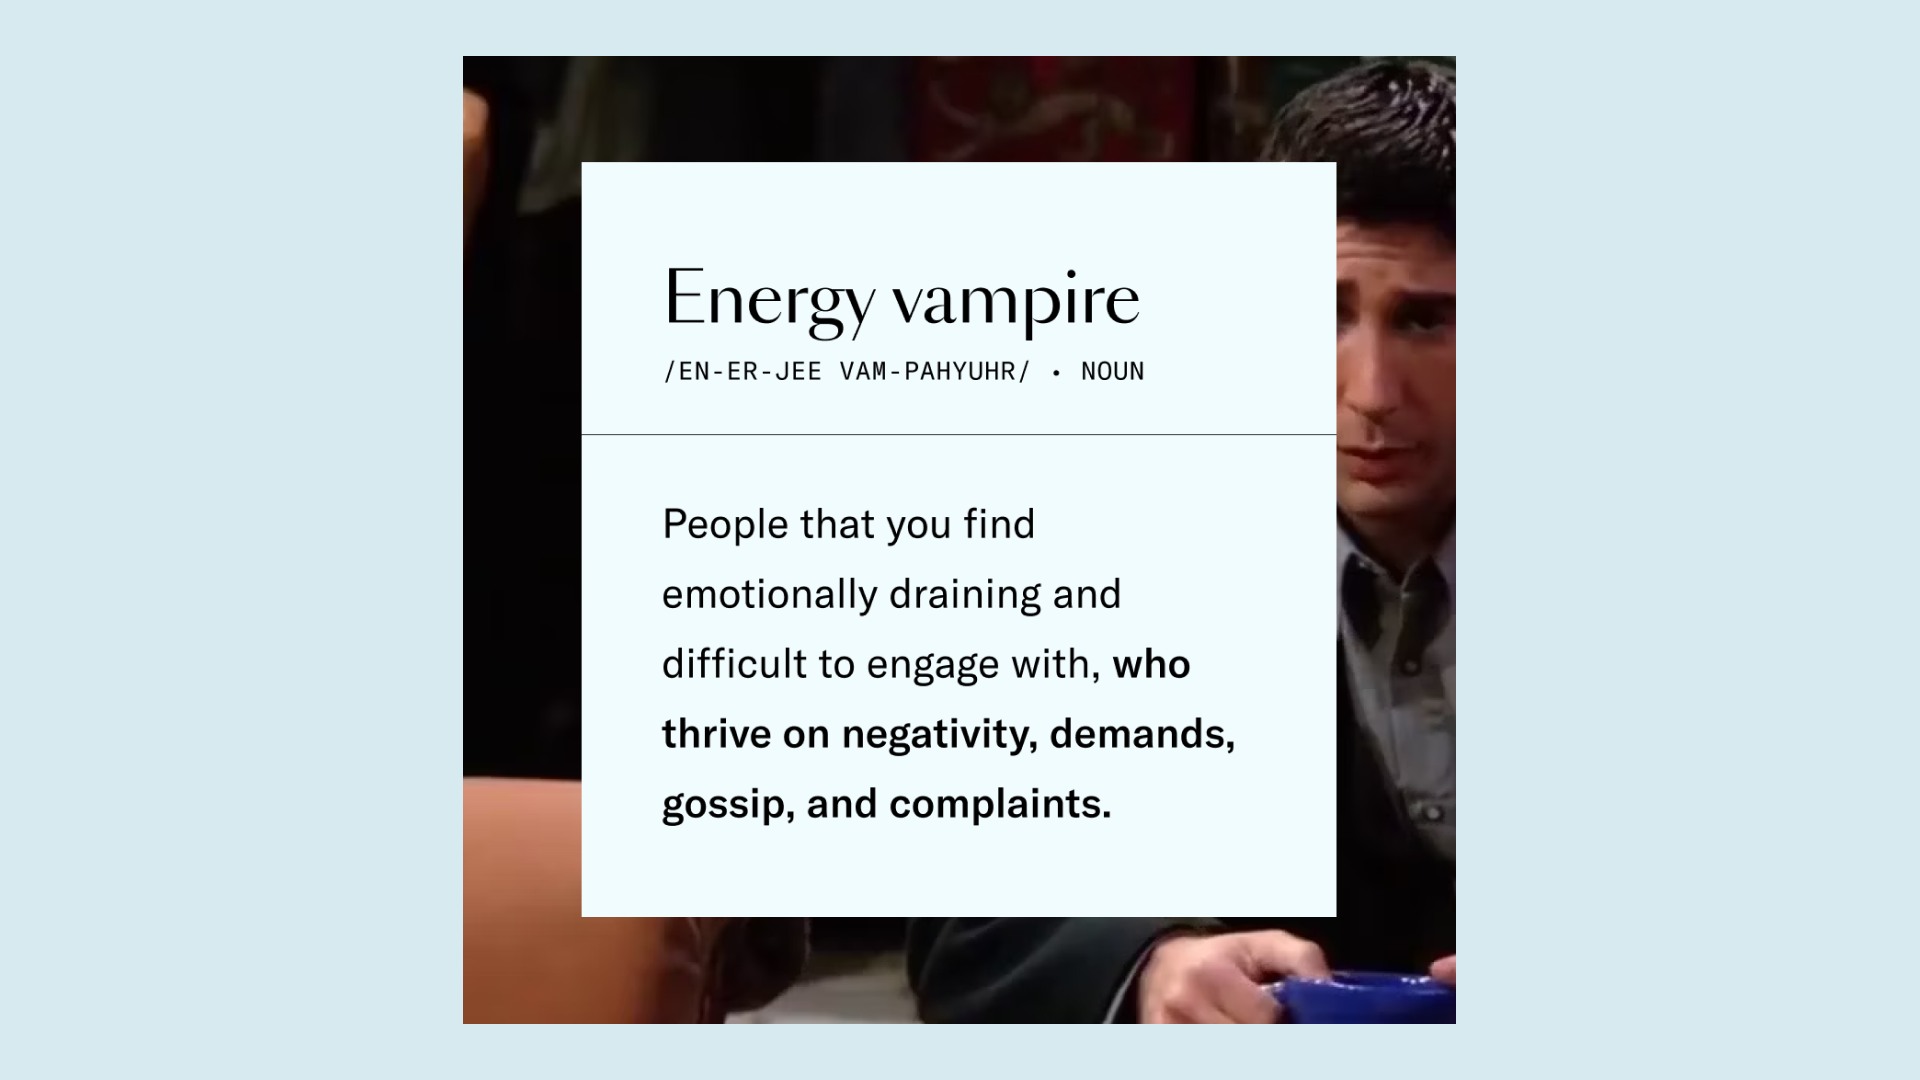 Energy Vampire people that you find emotionally draining and difficult to engage with, who thrive on negativity, demands, gossip, and complaints.